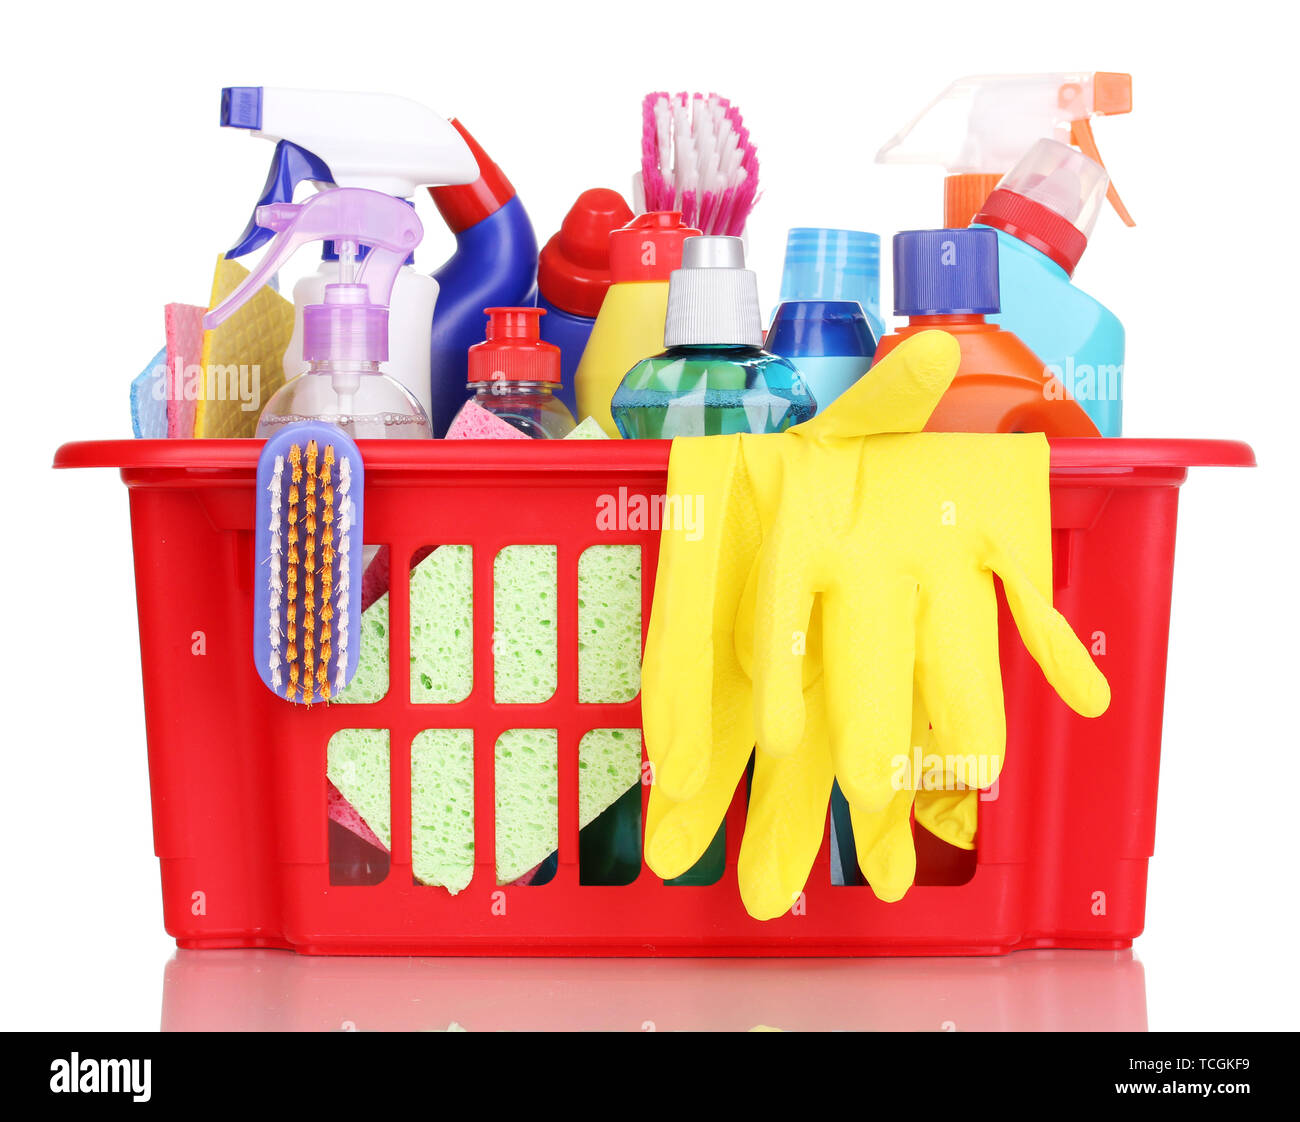 Premium Photo  Cleaning items in basket isolated on white background